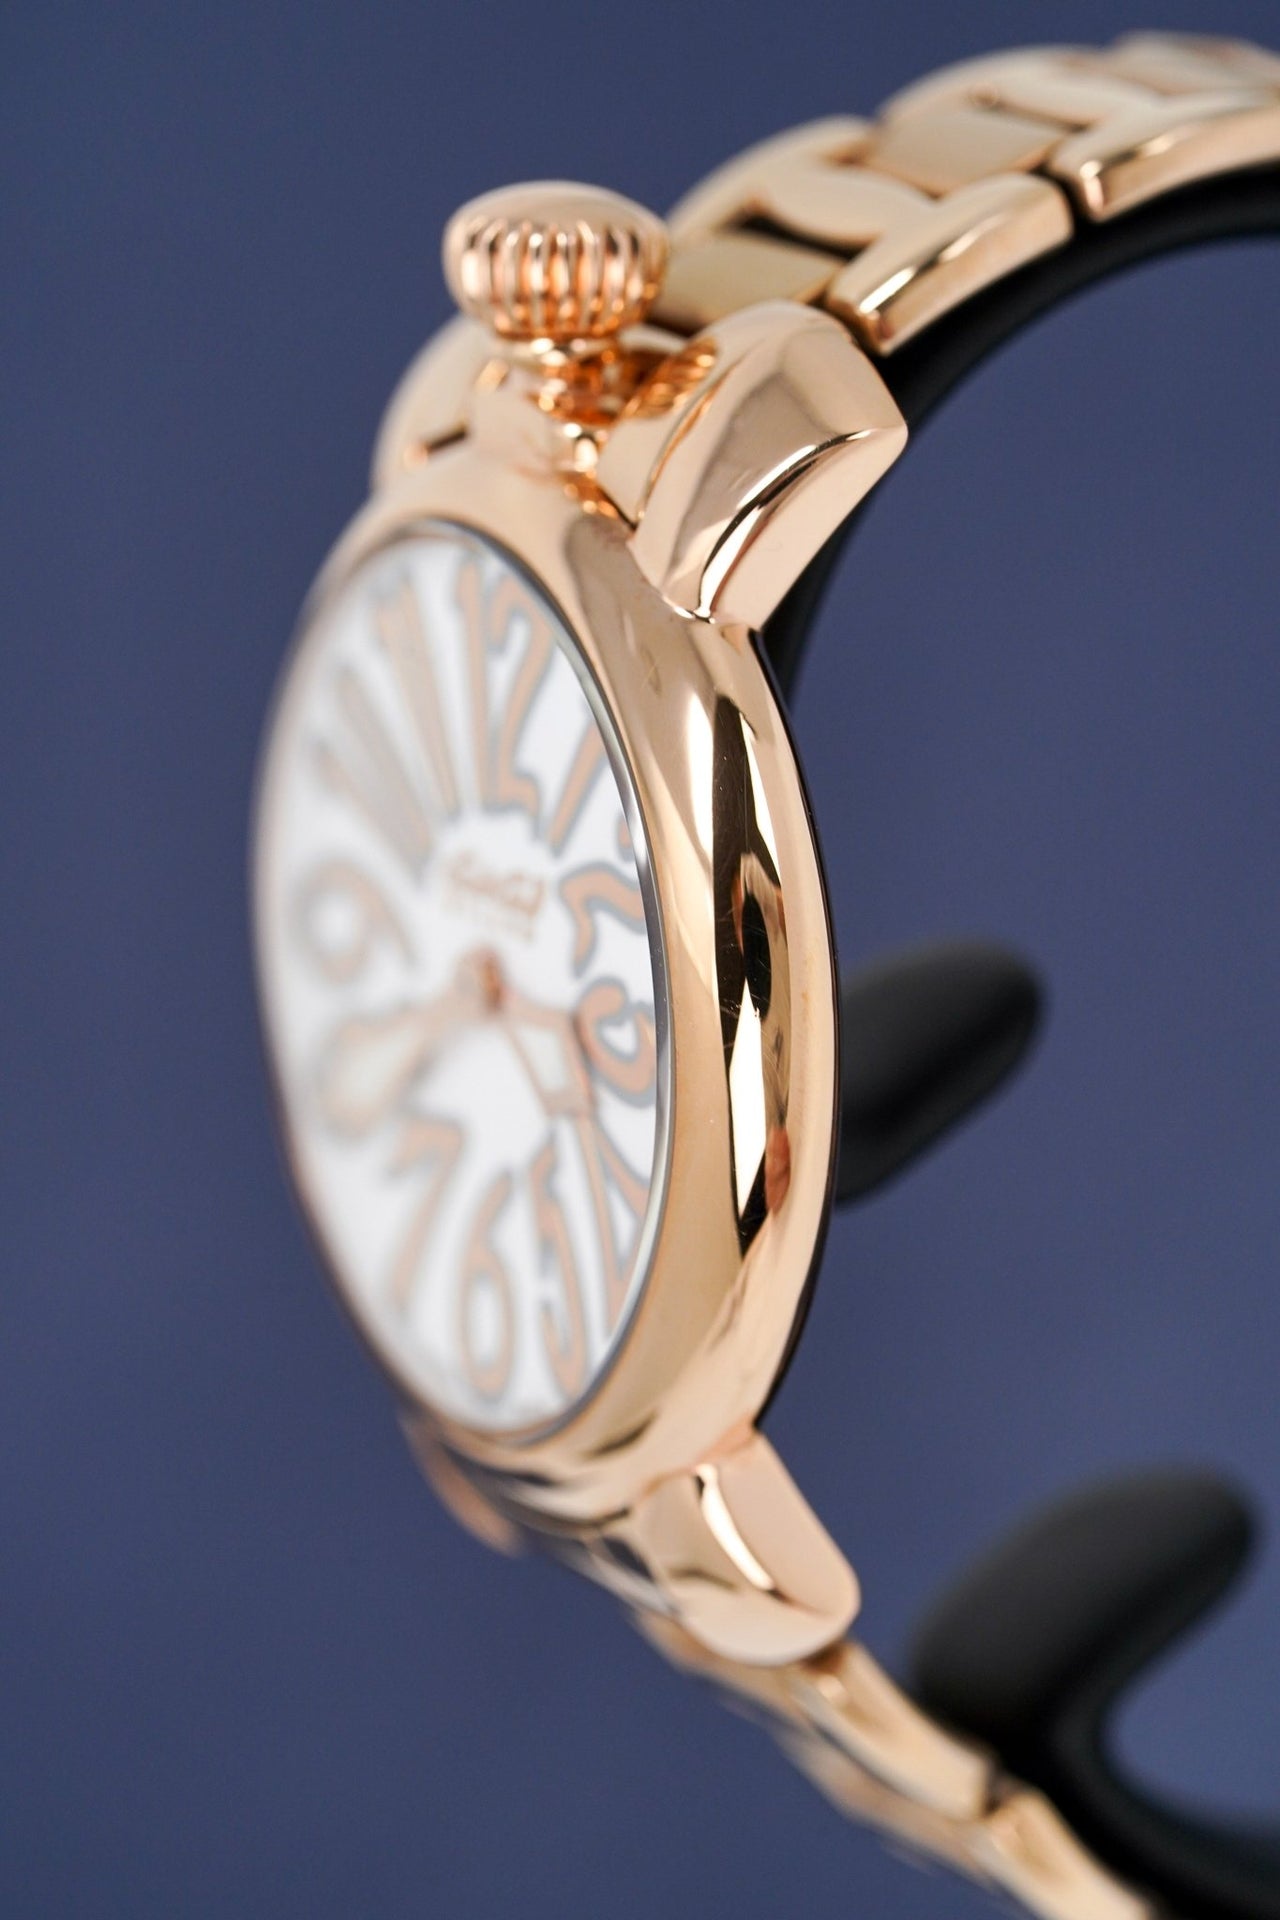 GaGà Milano Ladies Watch Manuale 35mm Rose Gold 6021.01 - Watches & Crystals